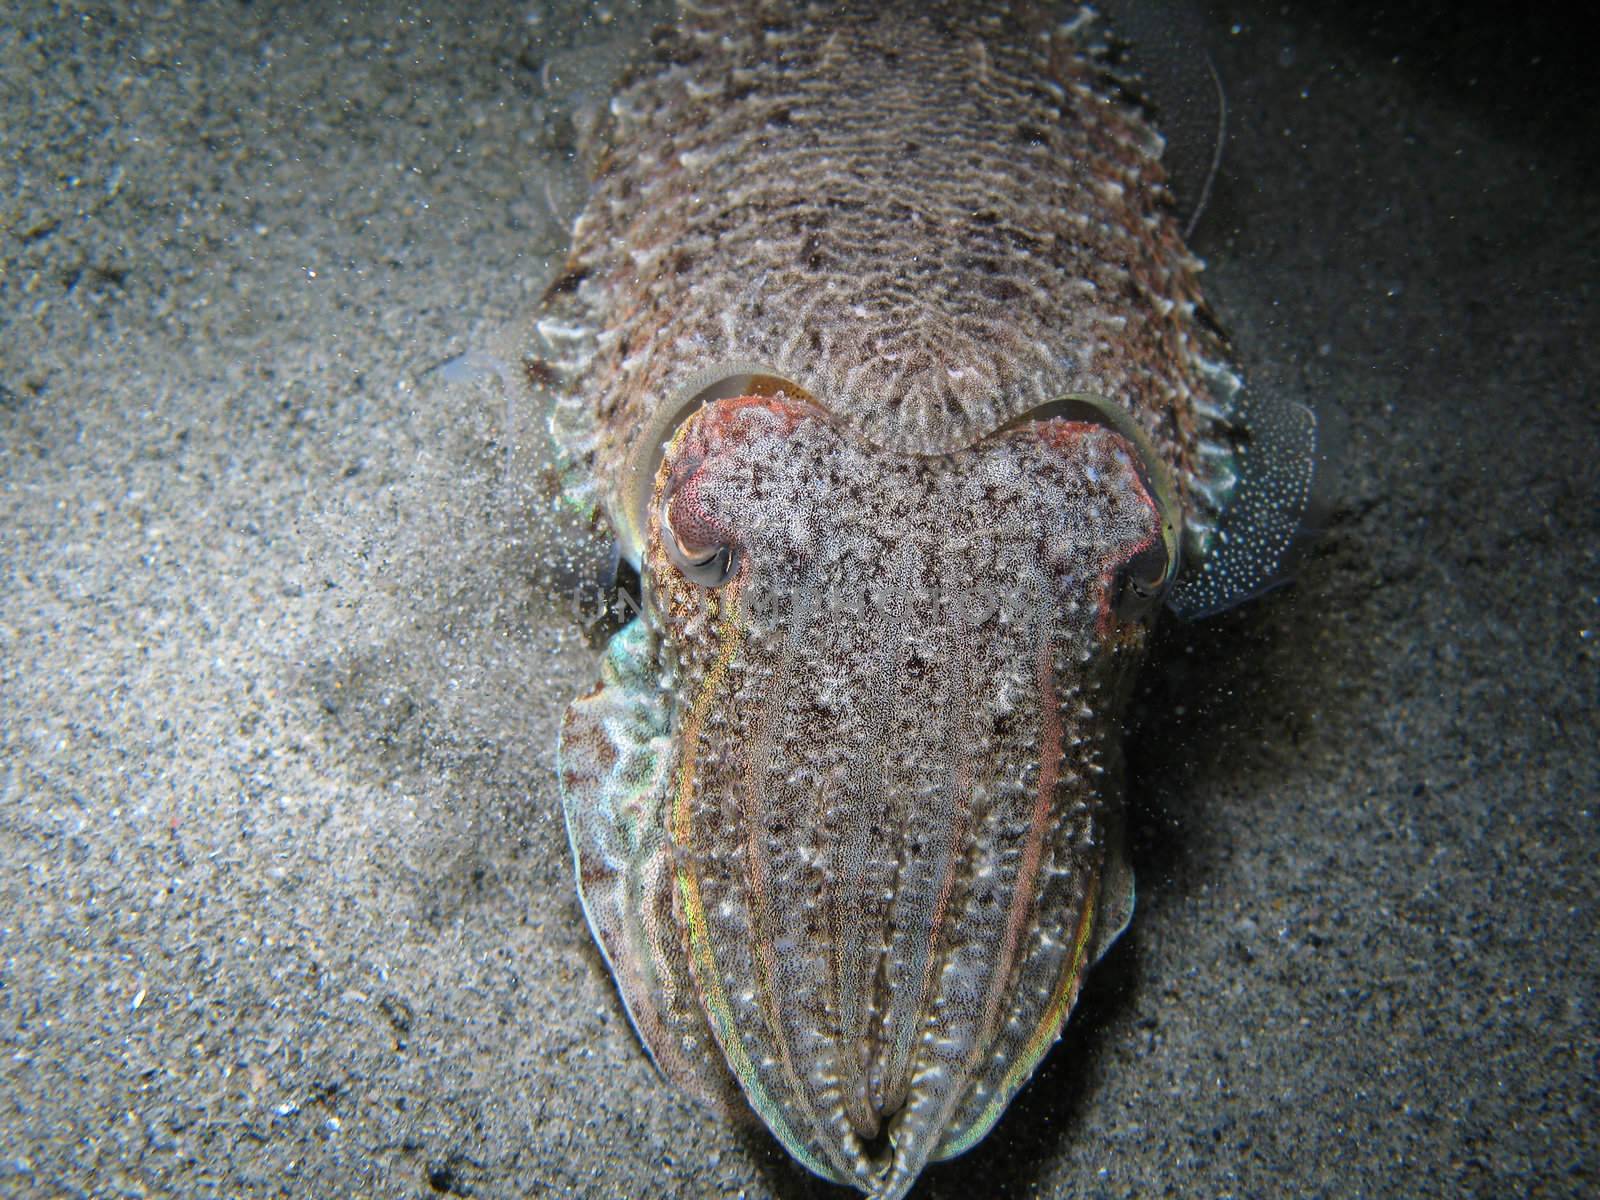 Cuttlefish. Shotted in the wild, nighttime.